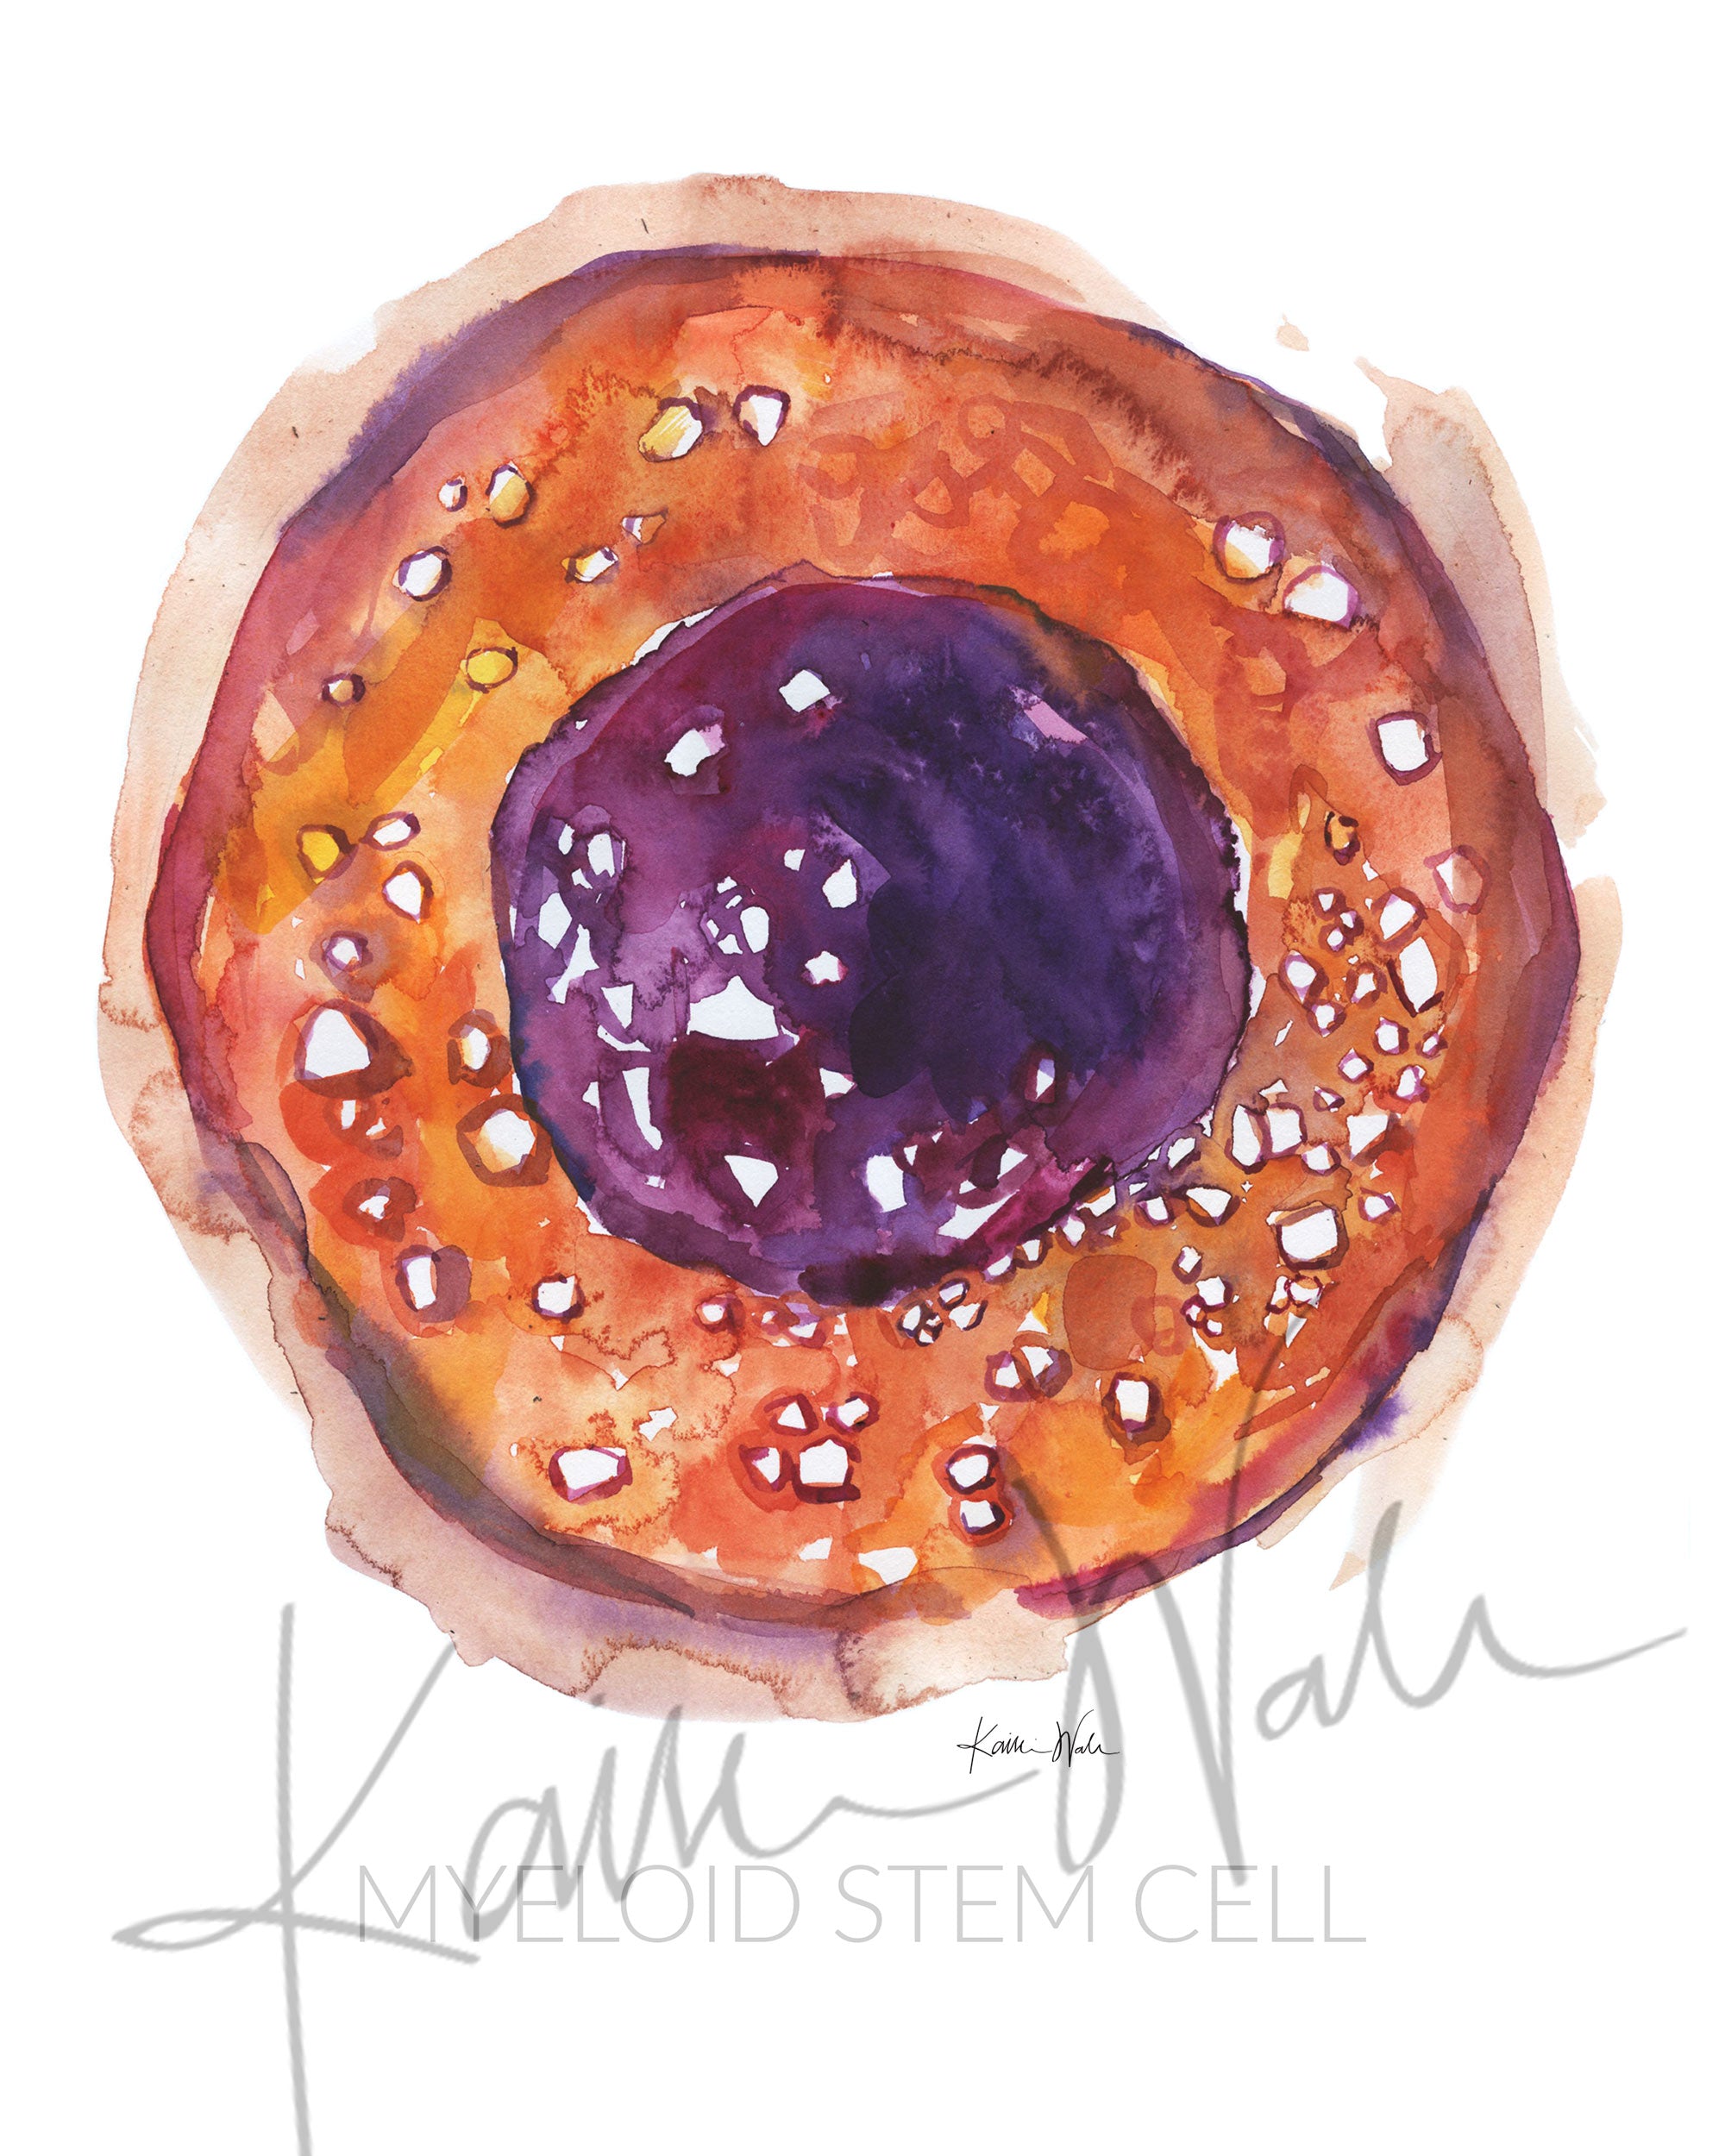 Unframed watercolor painting of Myeloid Stem Cell.